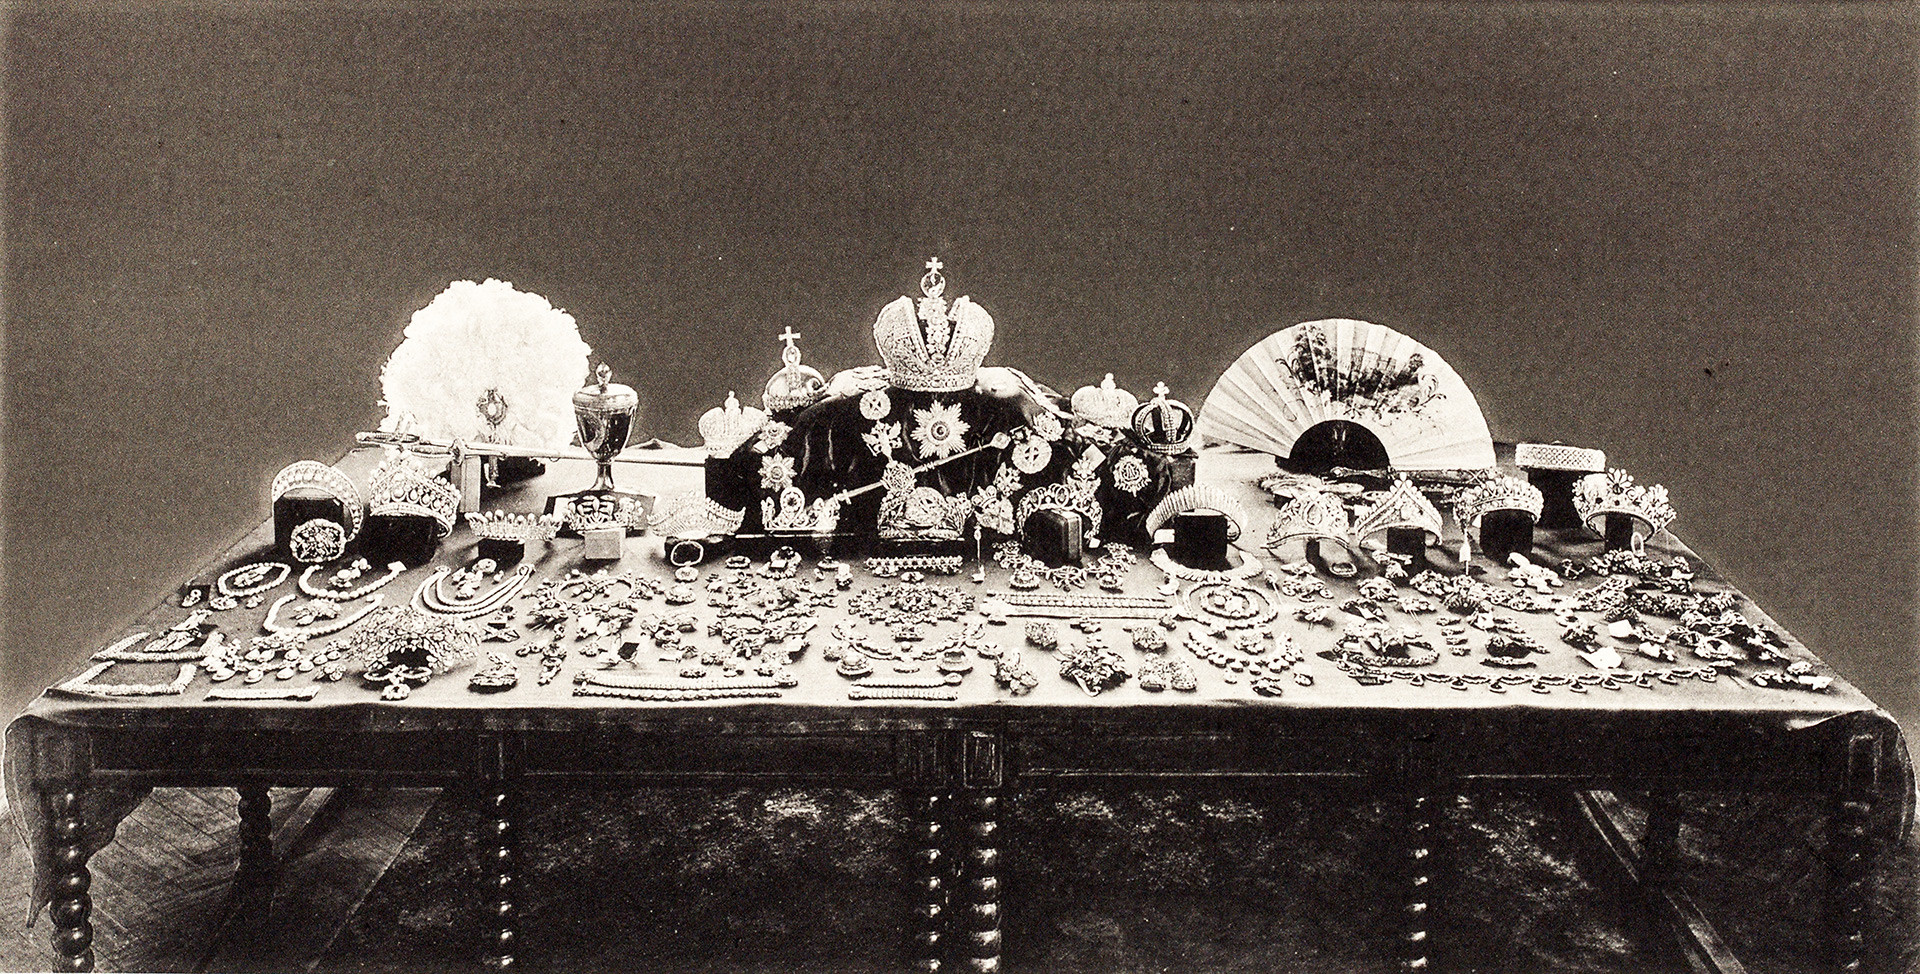 The famous photo taken by the Soviet commission in 1922 shows the large part of the Romanov crown jewelry collection. 